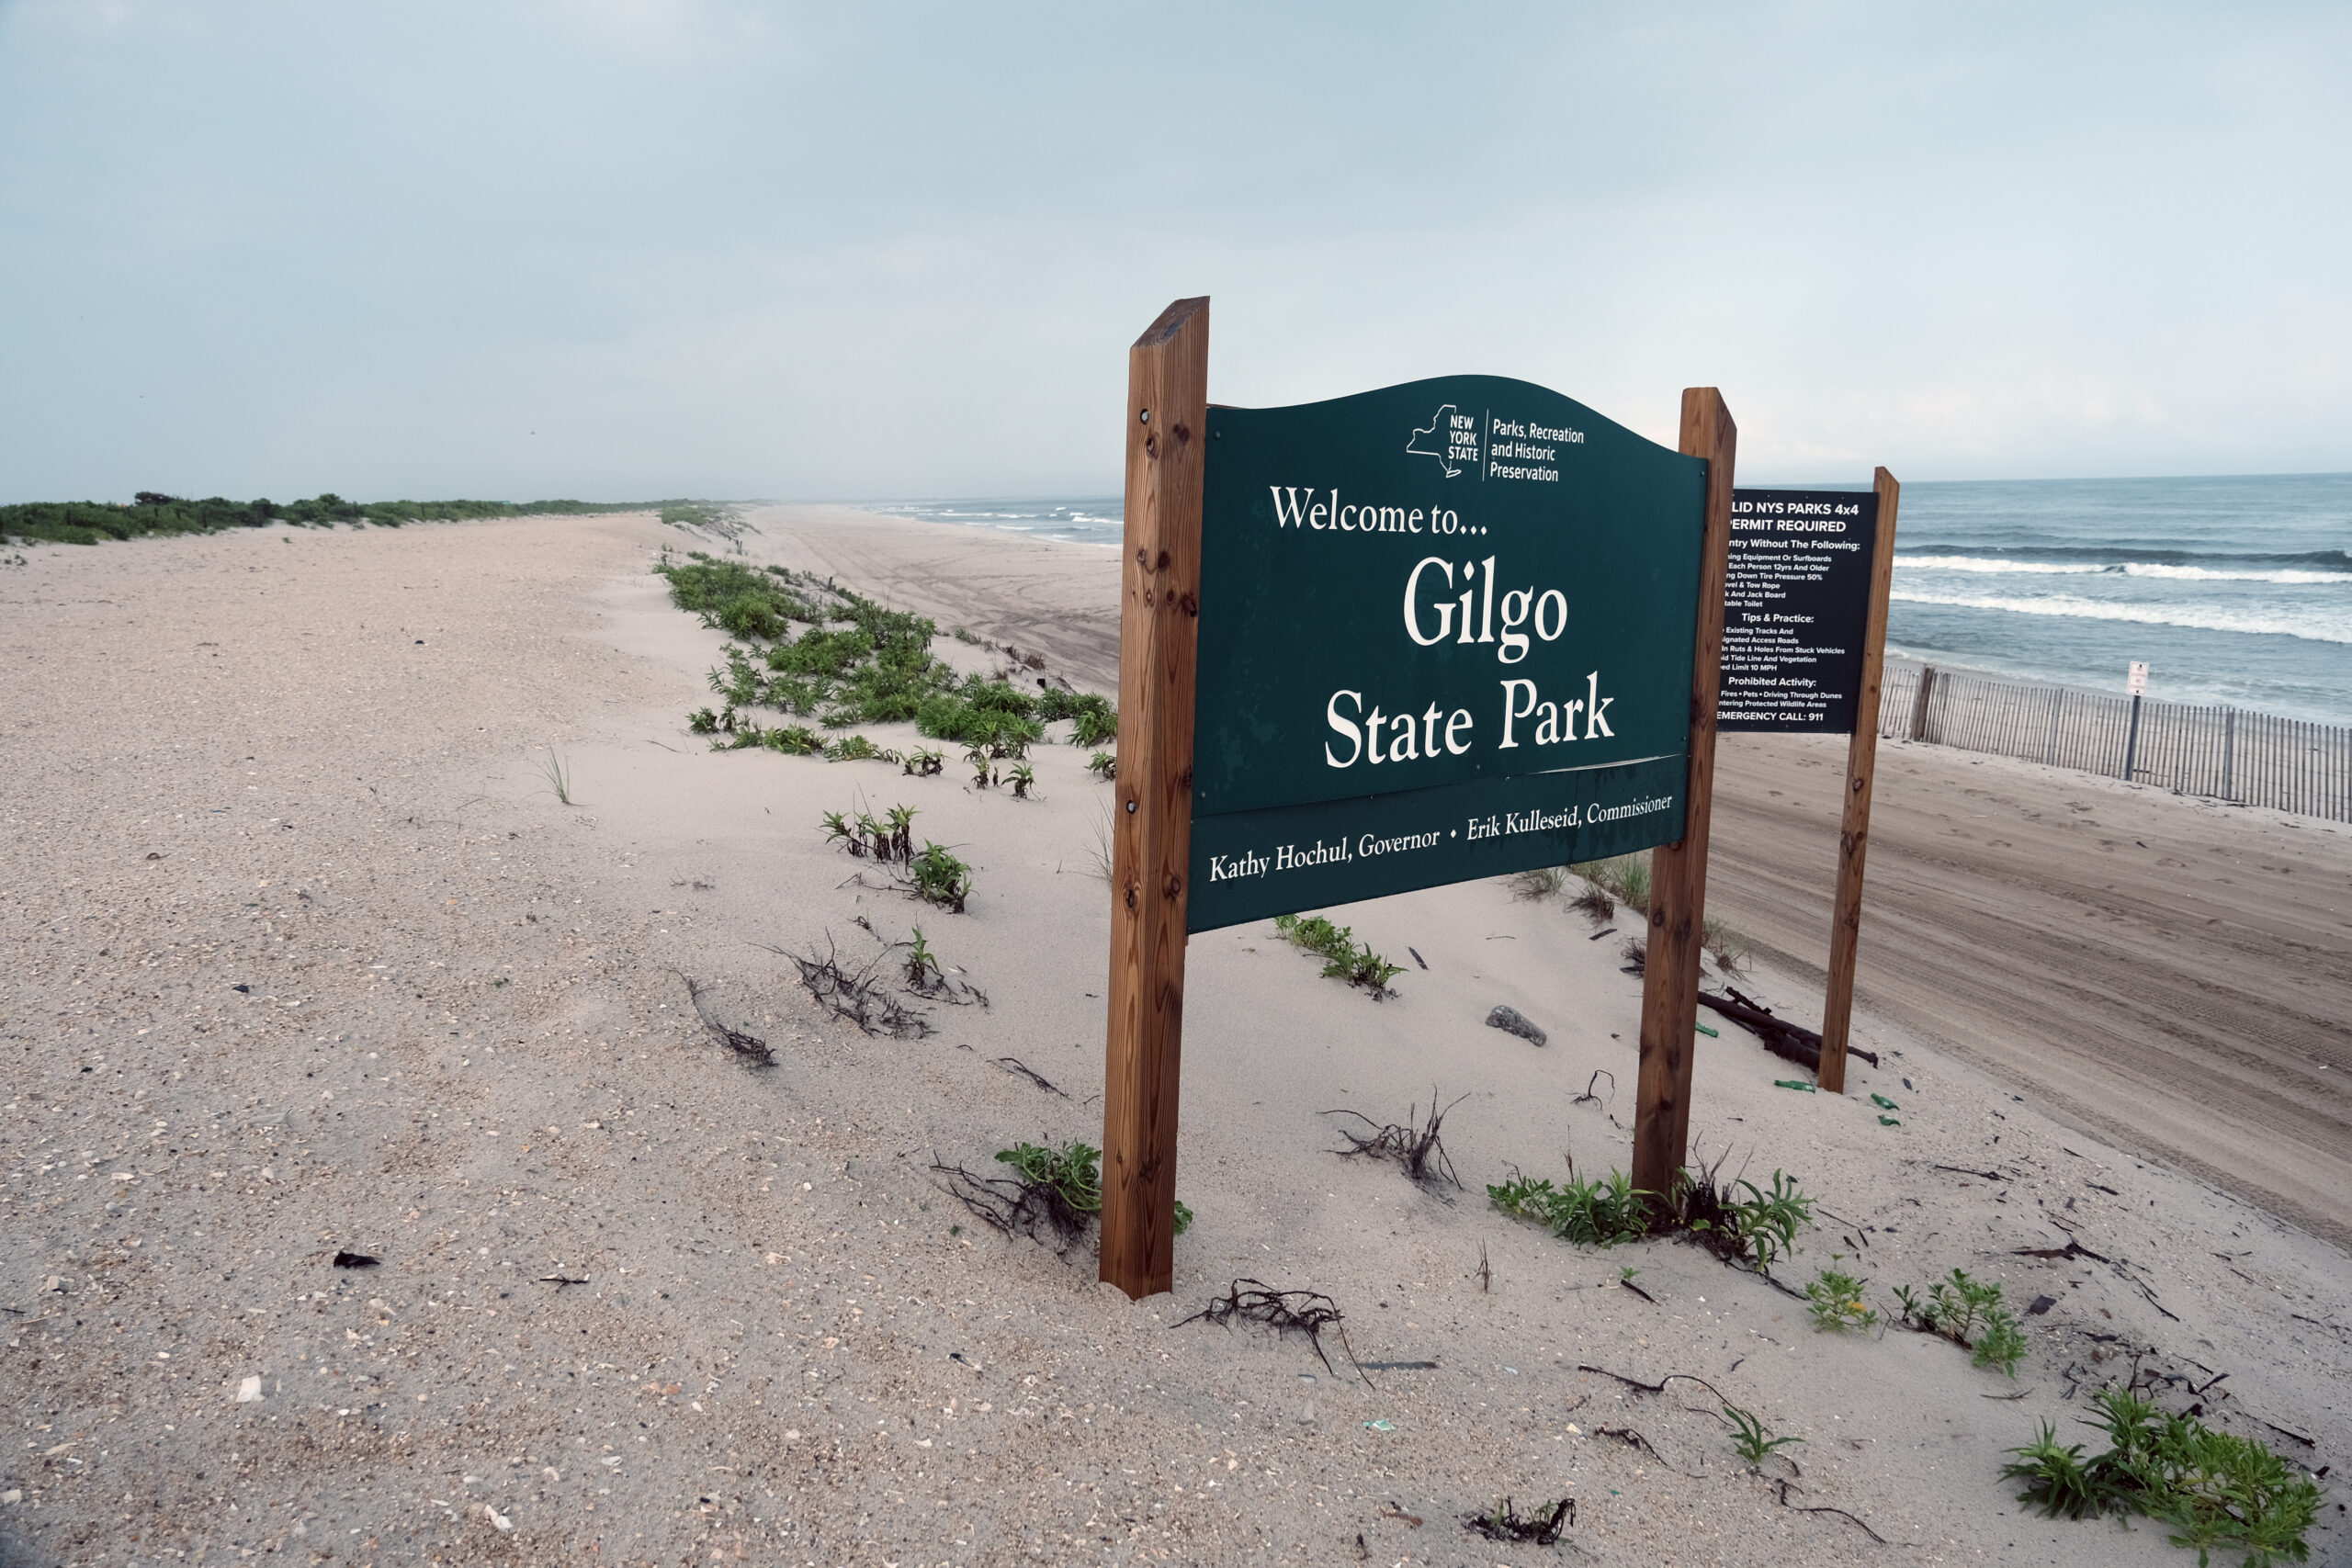 Suspect in Gilgo Beach Serial Killer Case to Face Charges for Fifth Murder: Sources